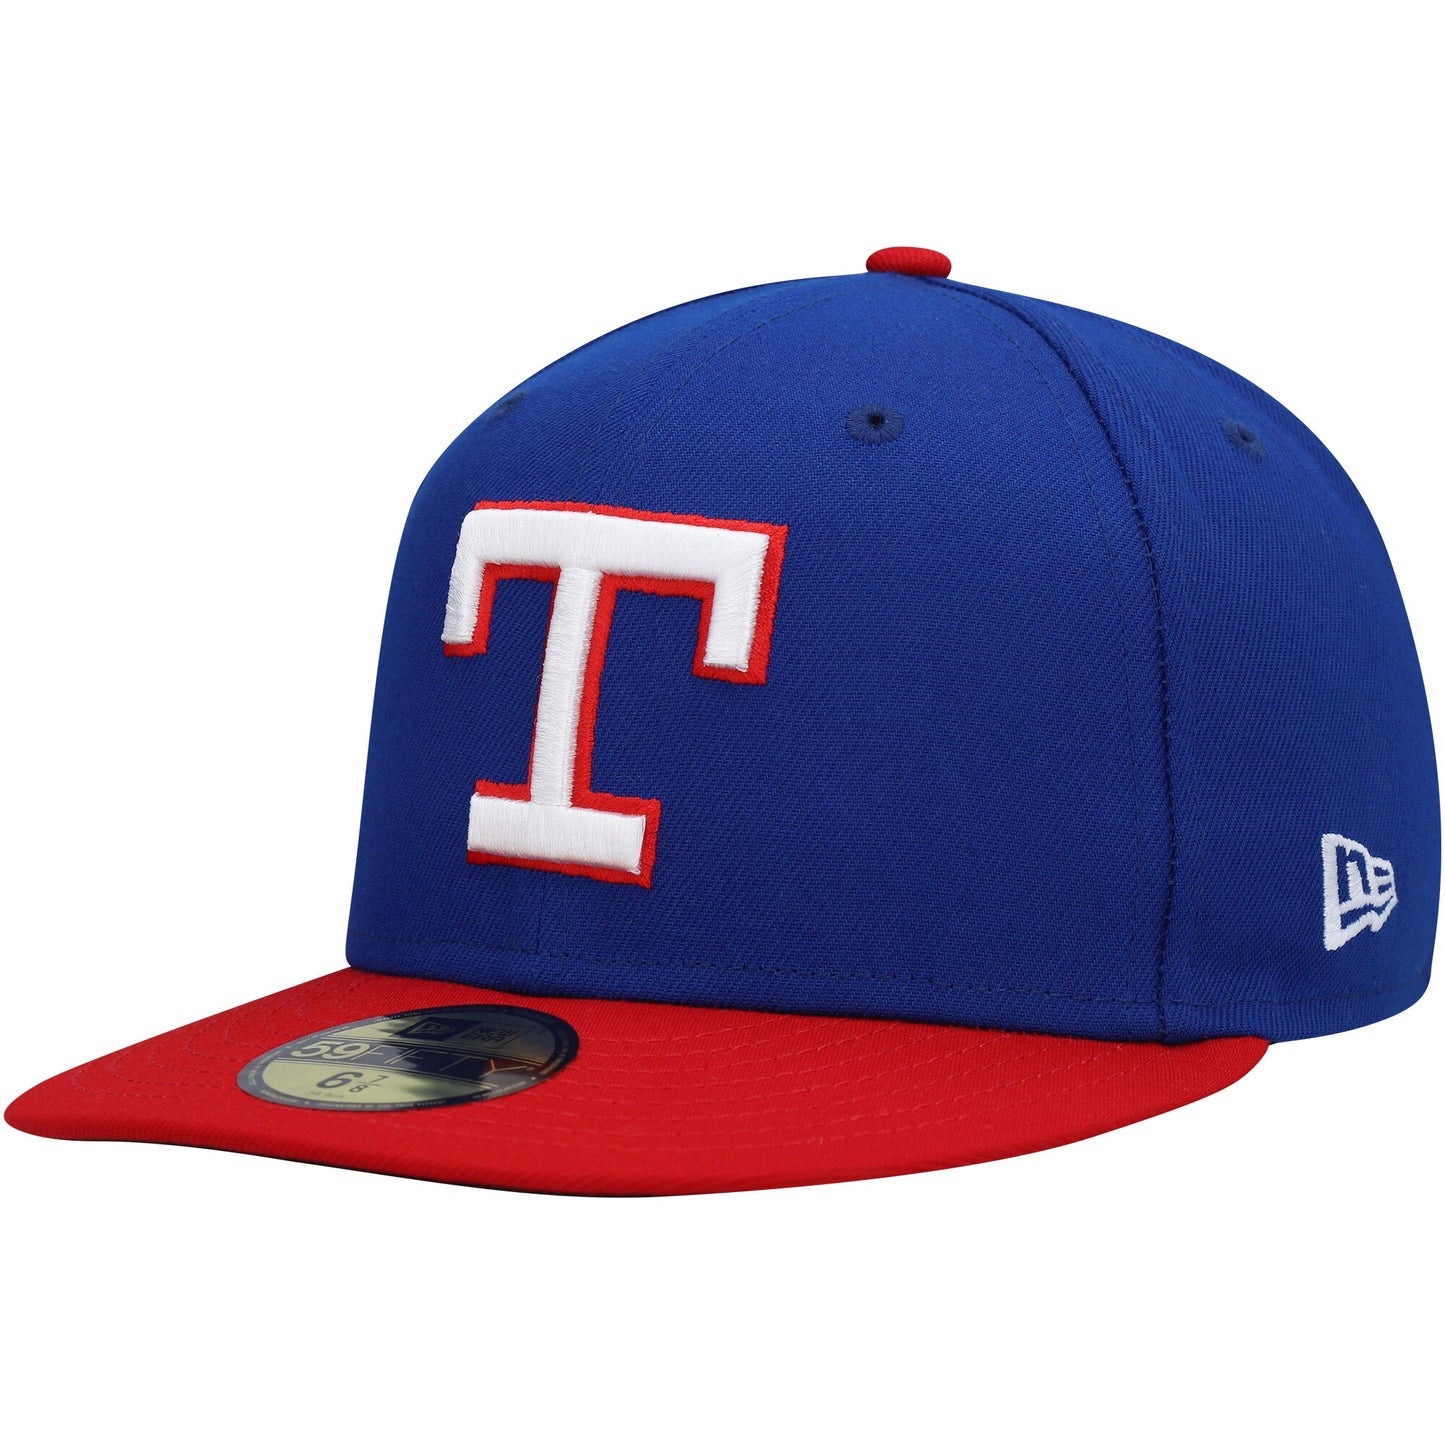 Texas Rangers New Era Cooperstown Collection Turn Back The Clock 59FIFTY Fitted Hat - Royal